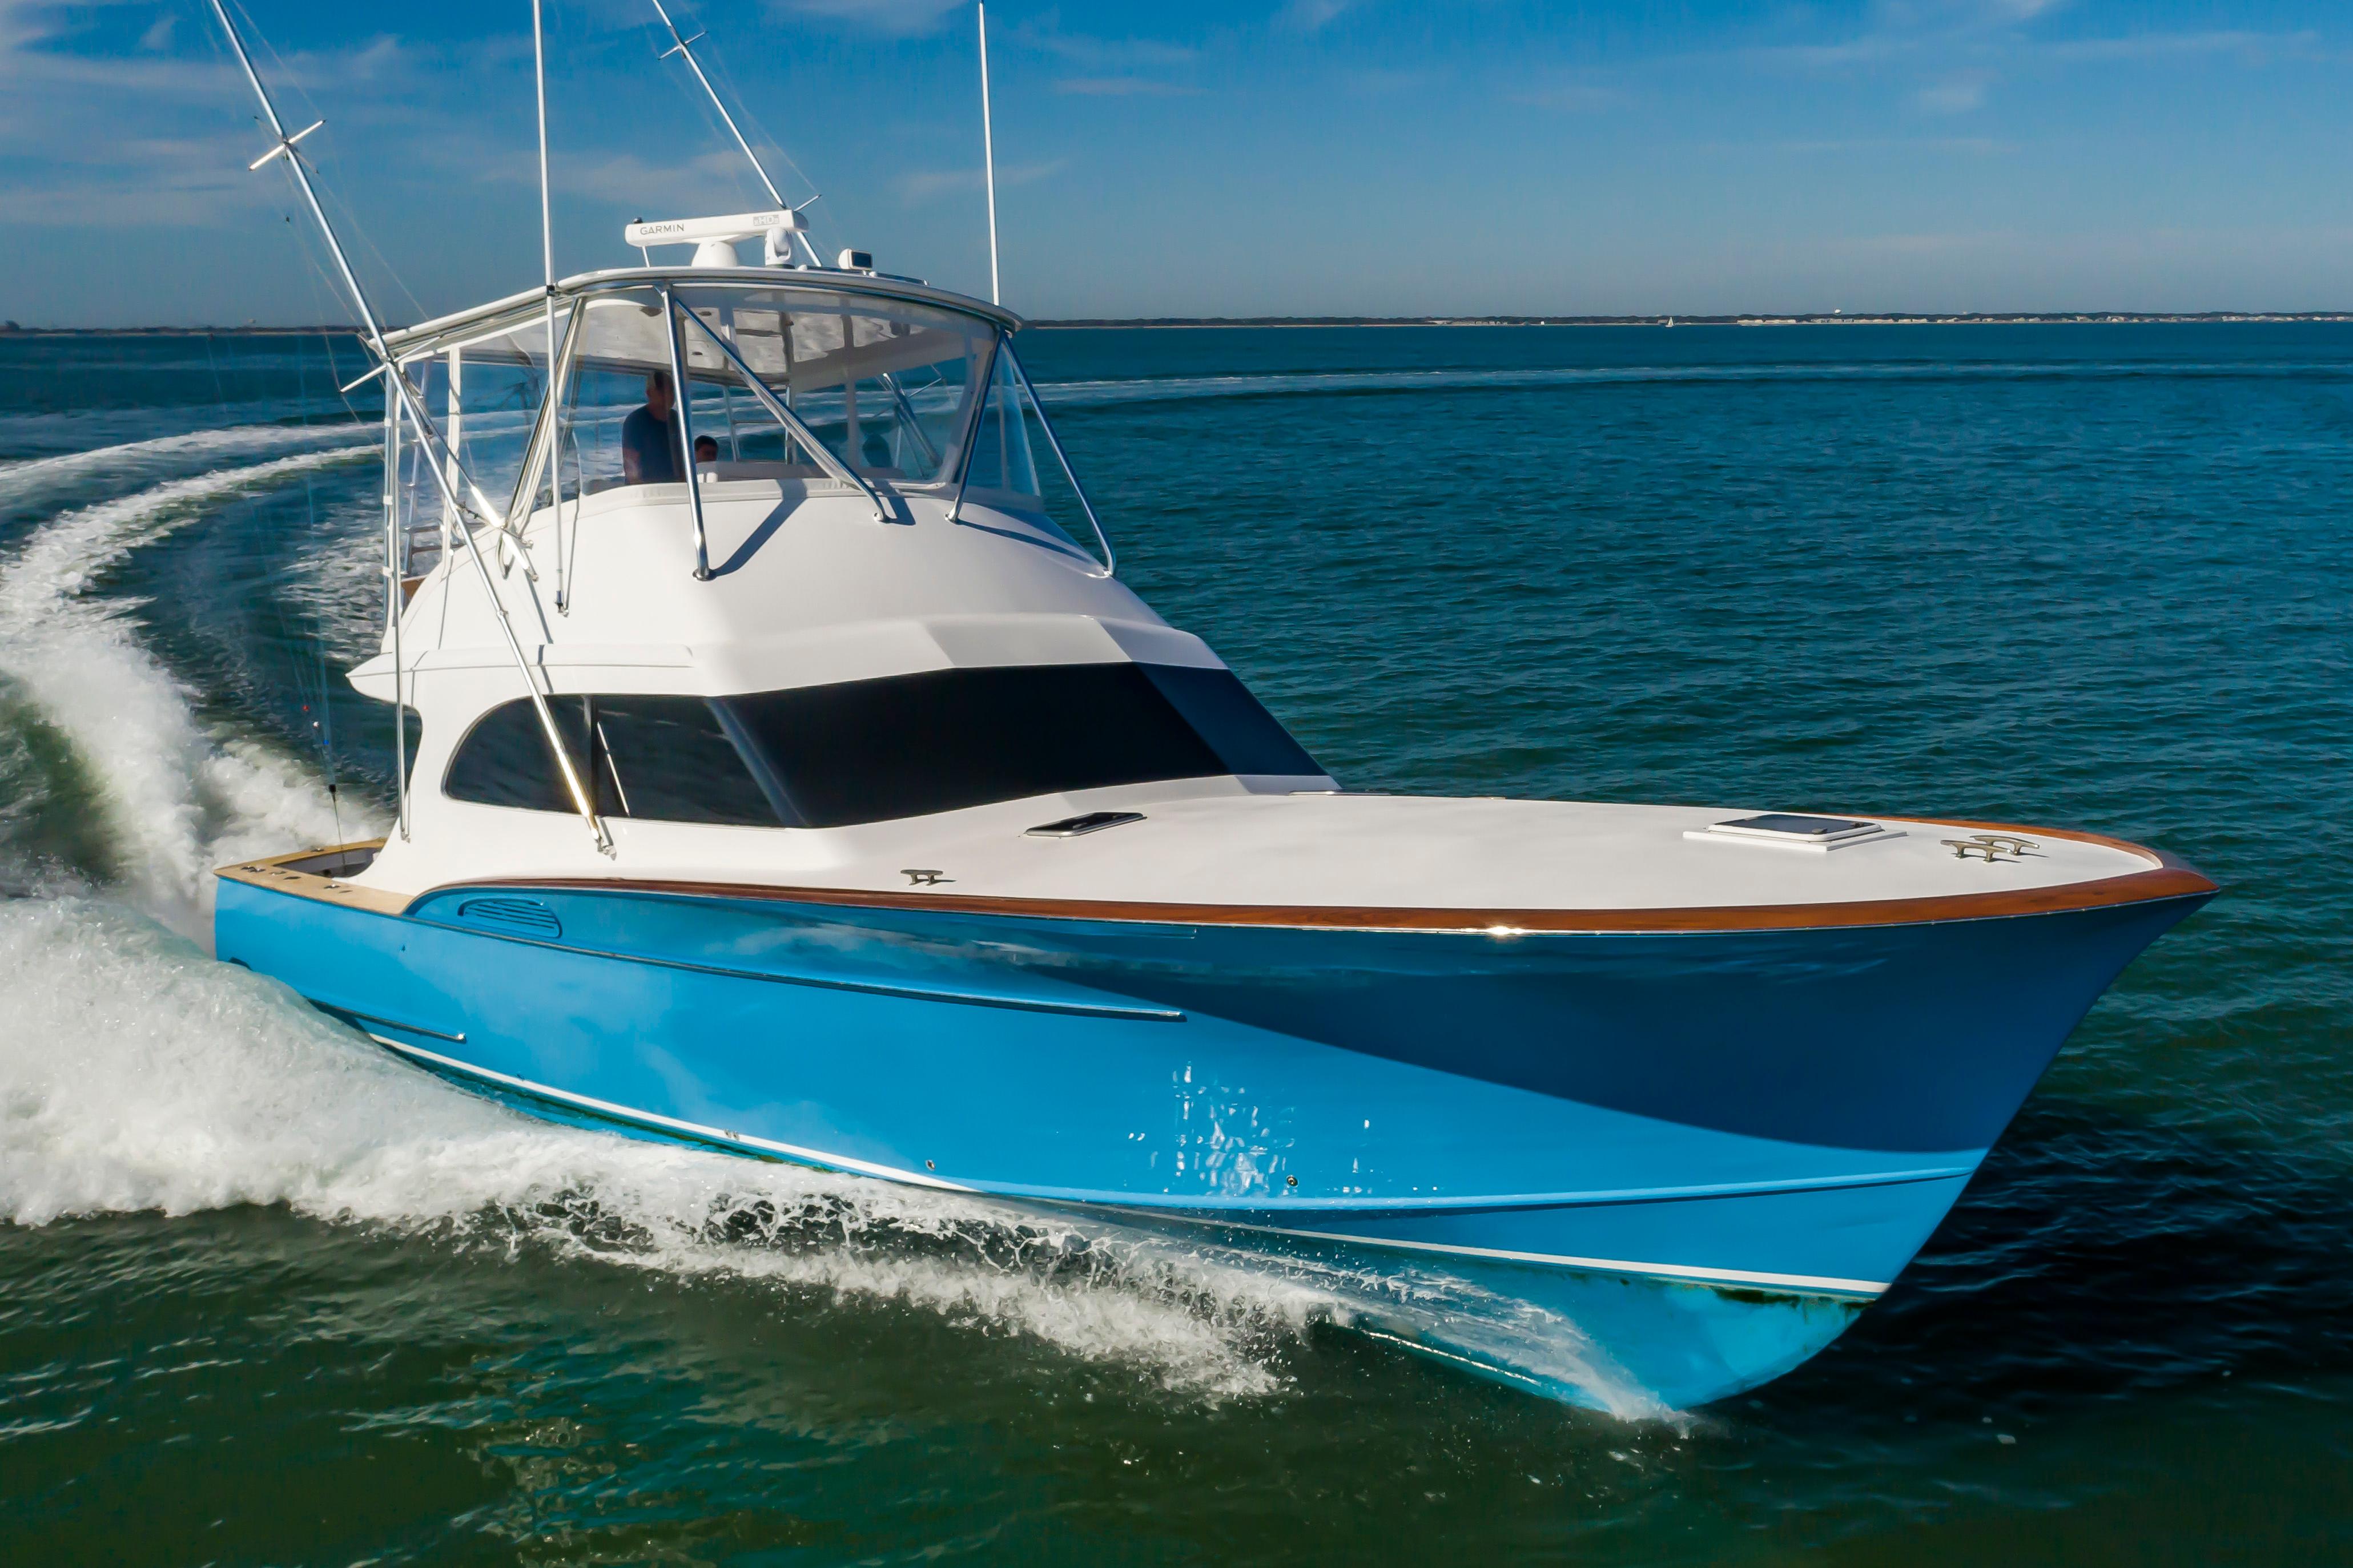 Sport Fishing boats for sale in Virginia - Boat Trader